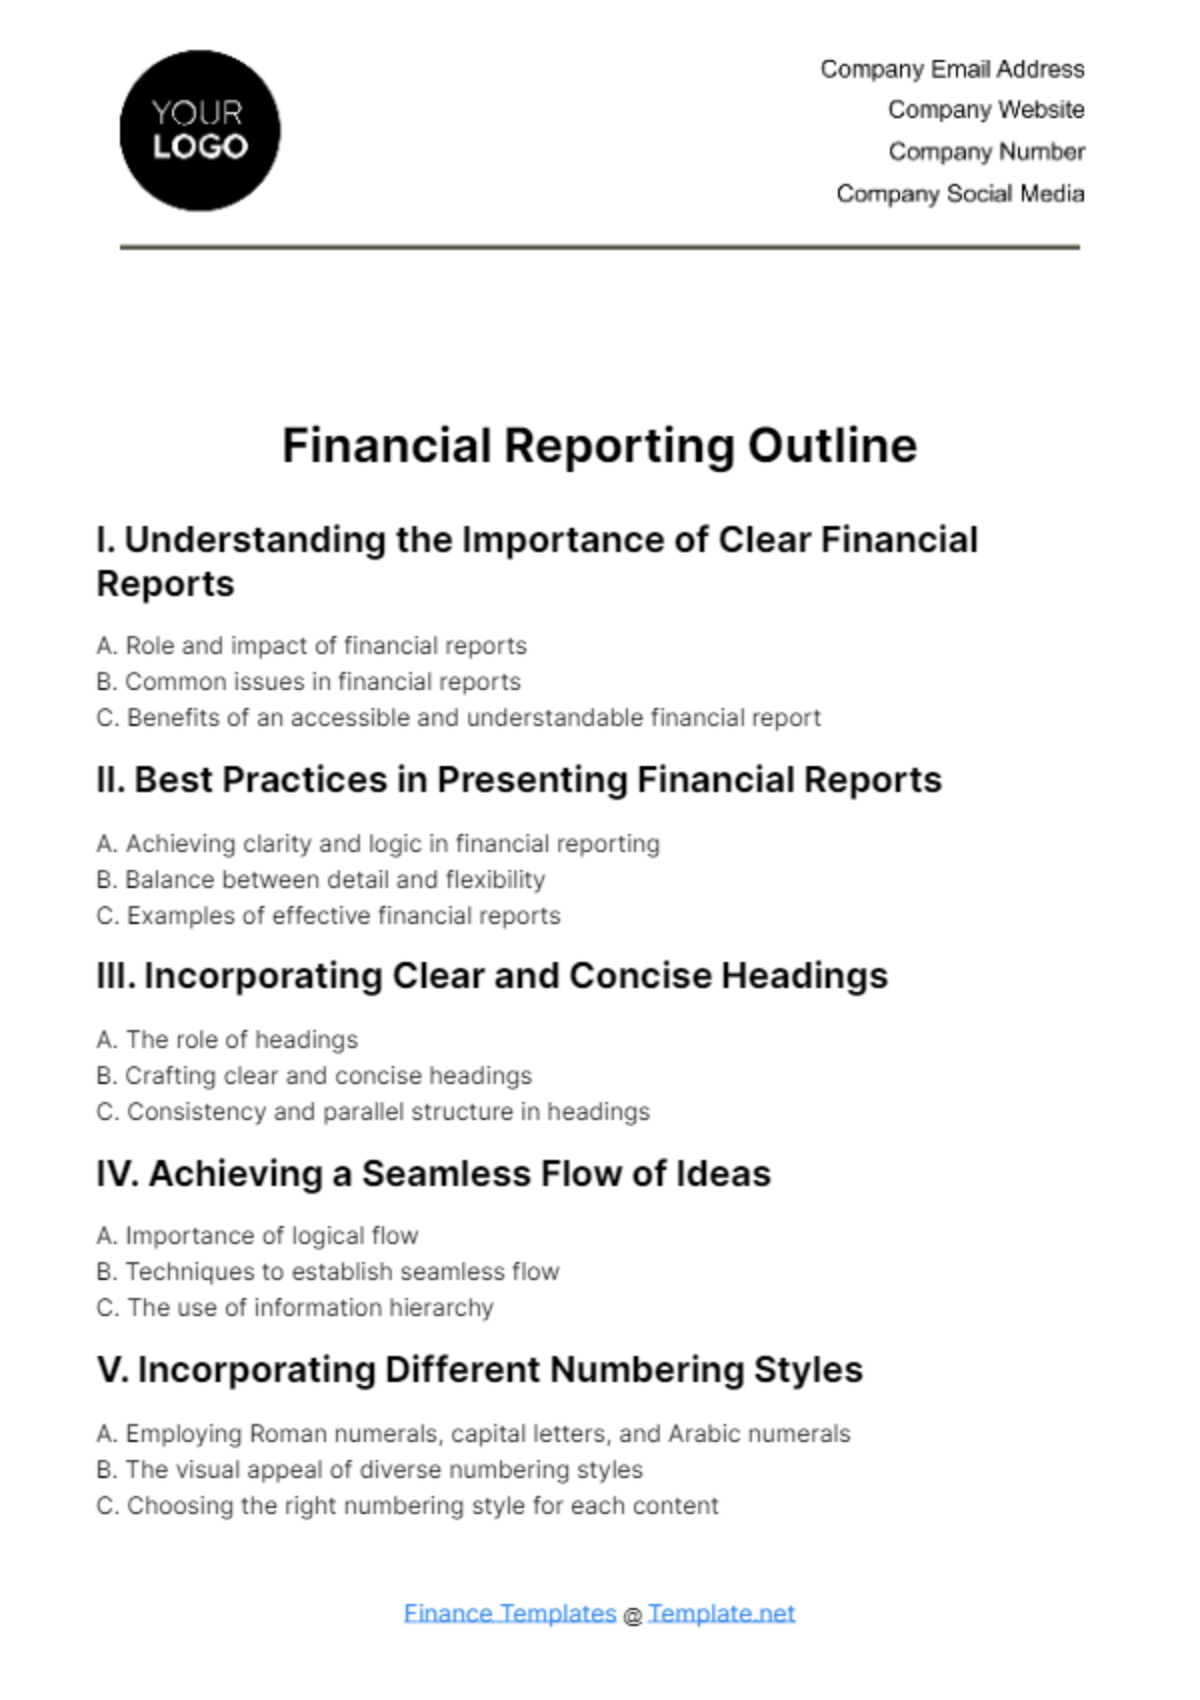 Free Financial Reporting Outline Template